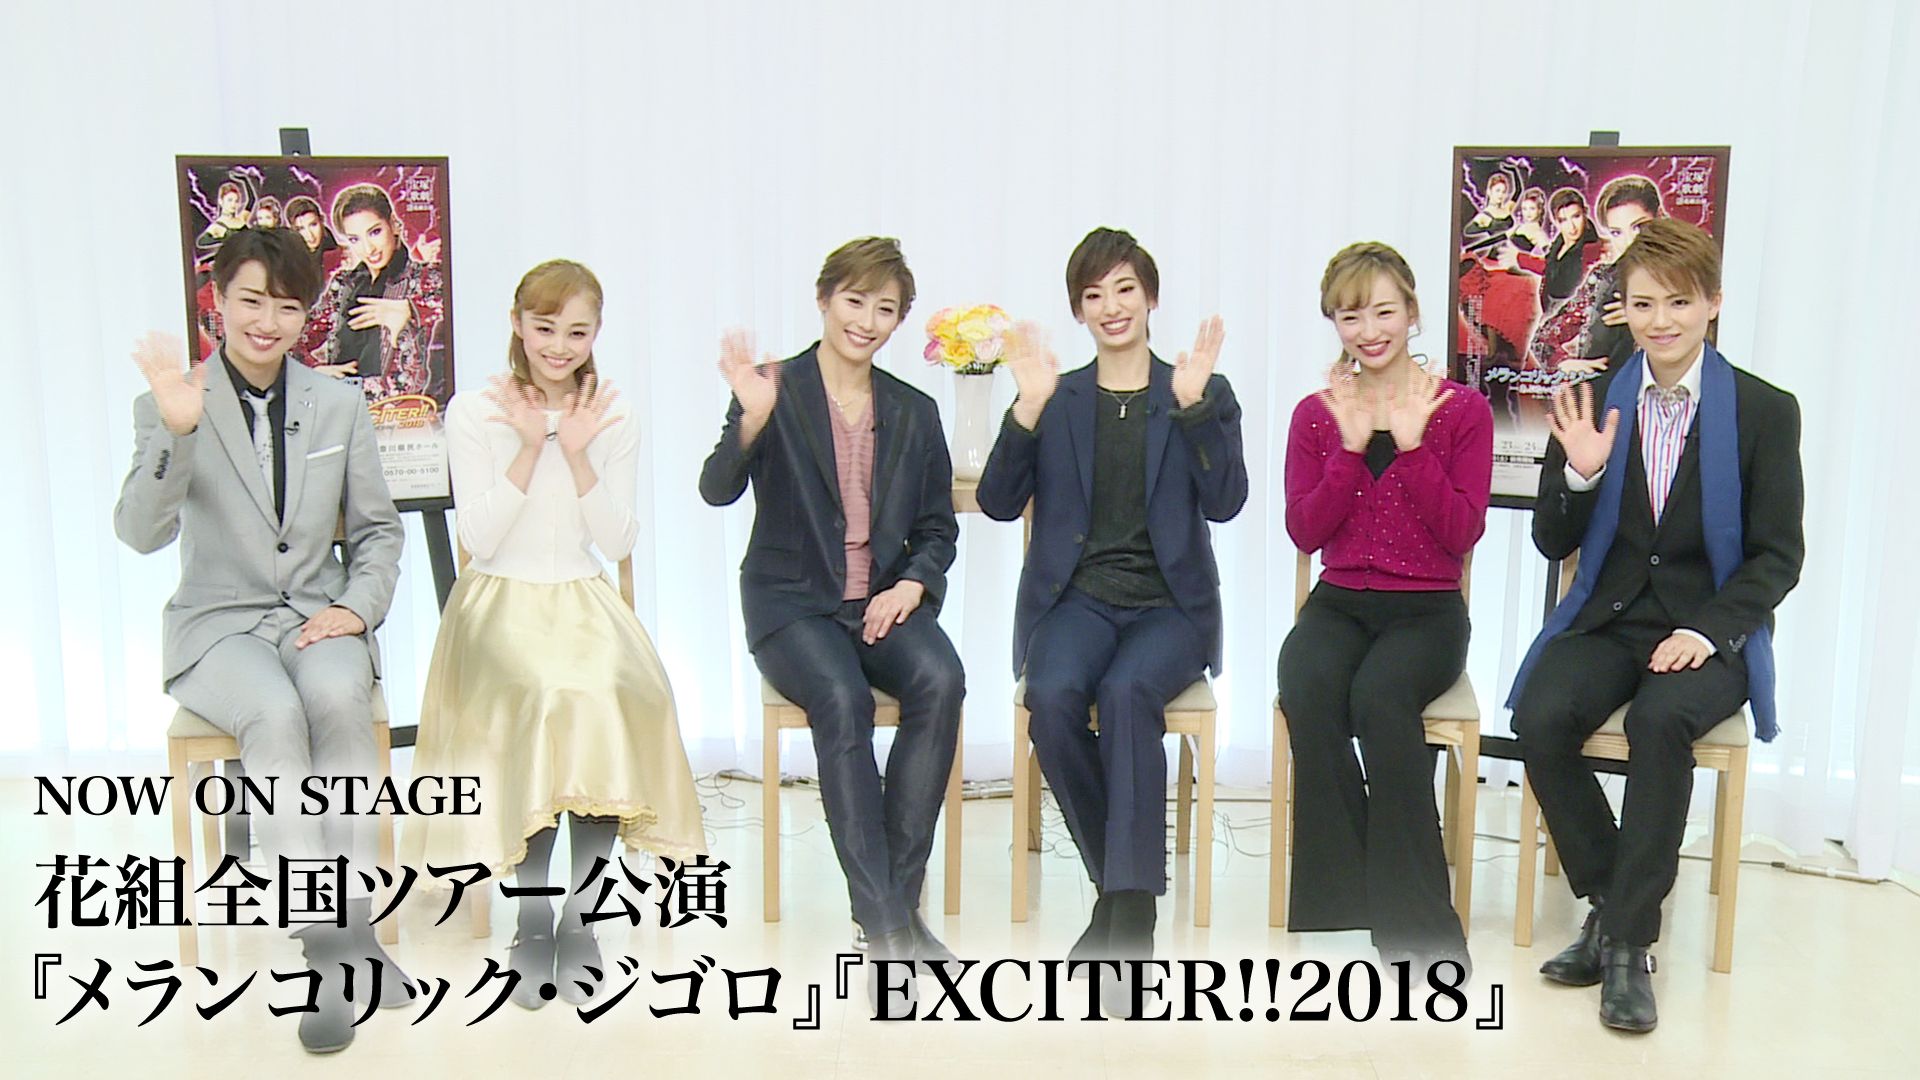 NOW ON STAGE 花組全国ツアー公演『メランコリック・ジゴロ』『EXCITER！！2018』